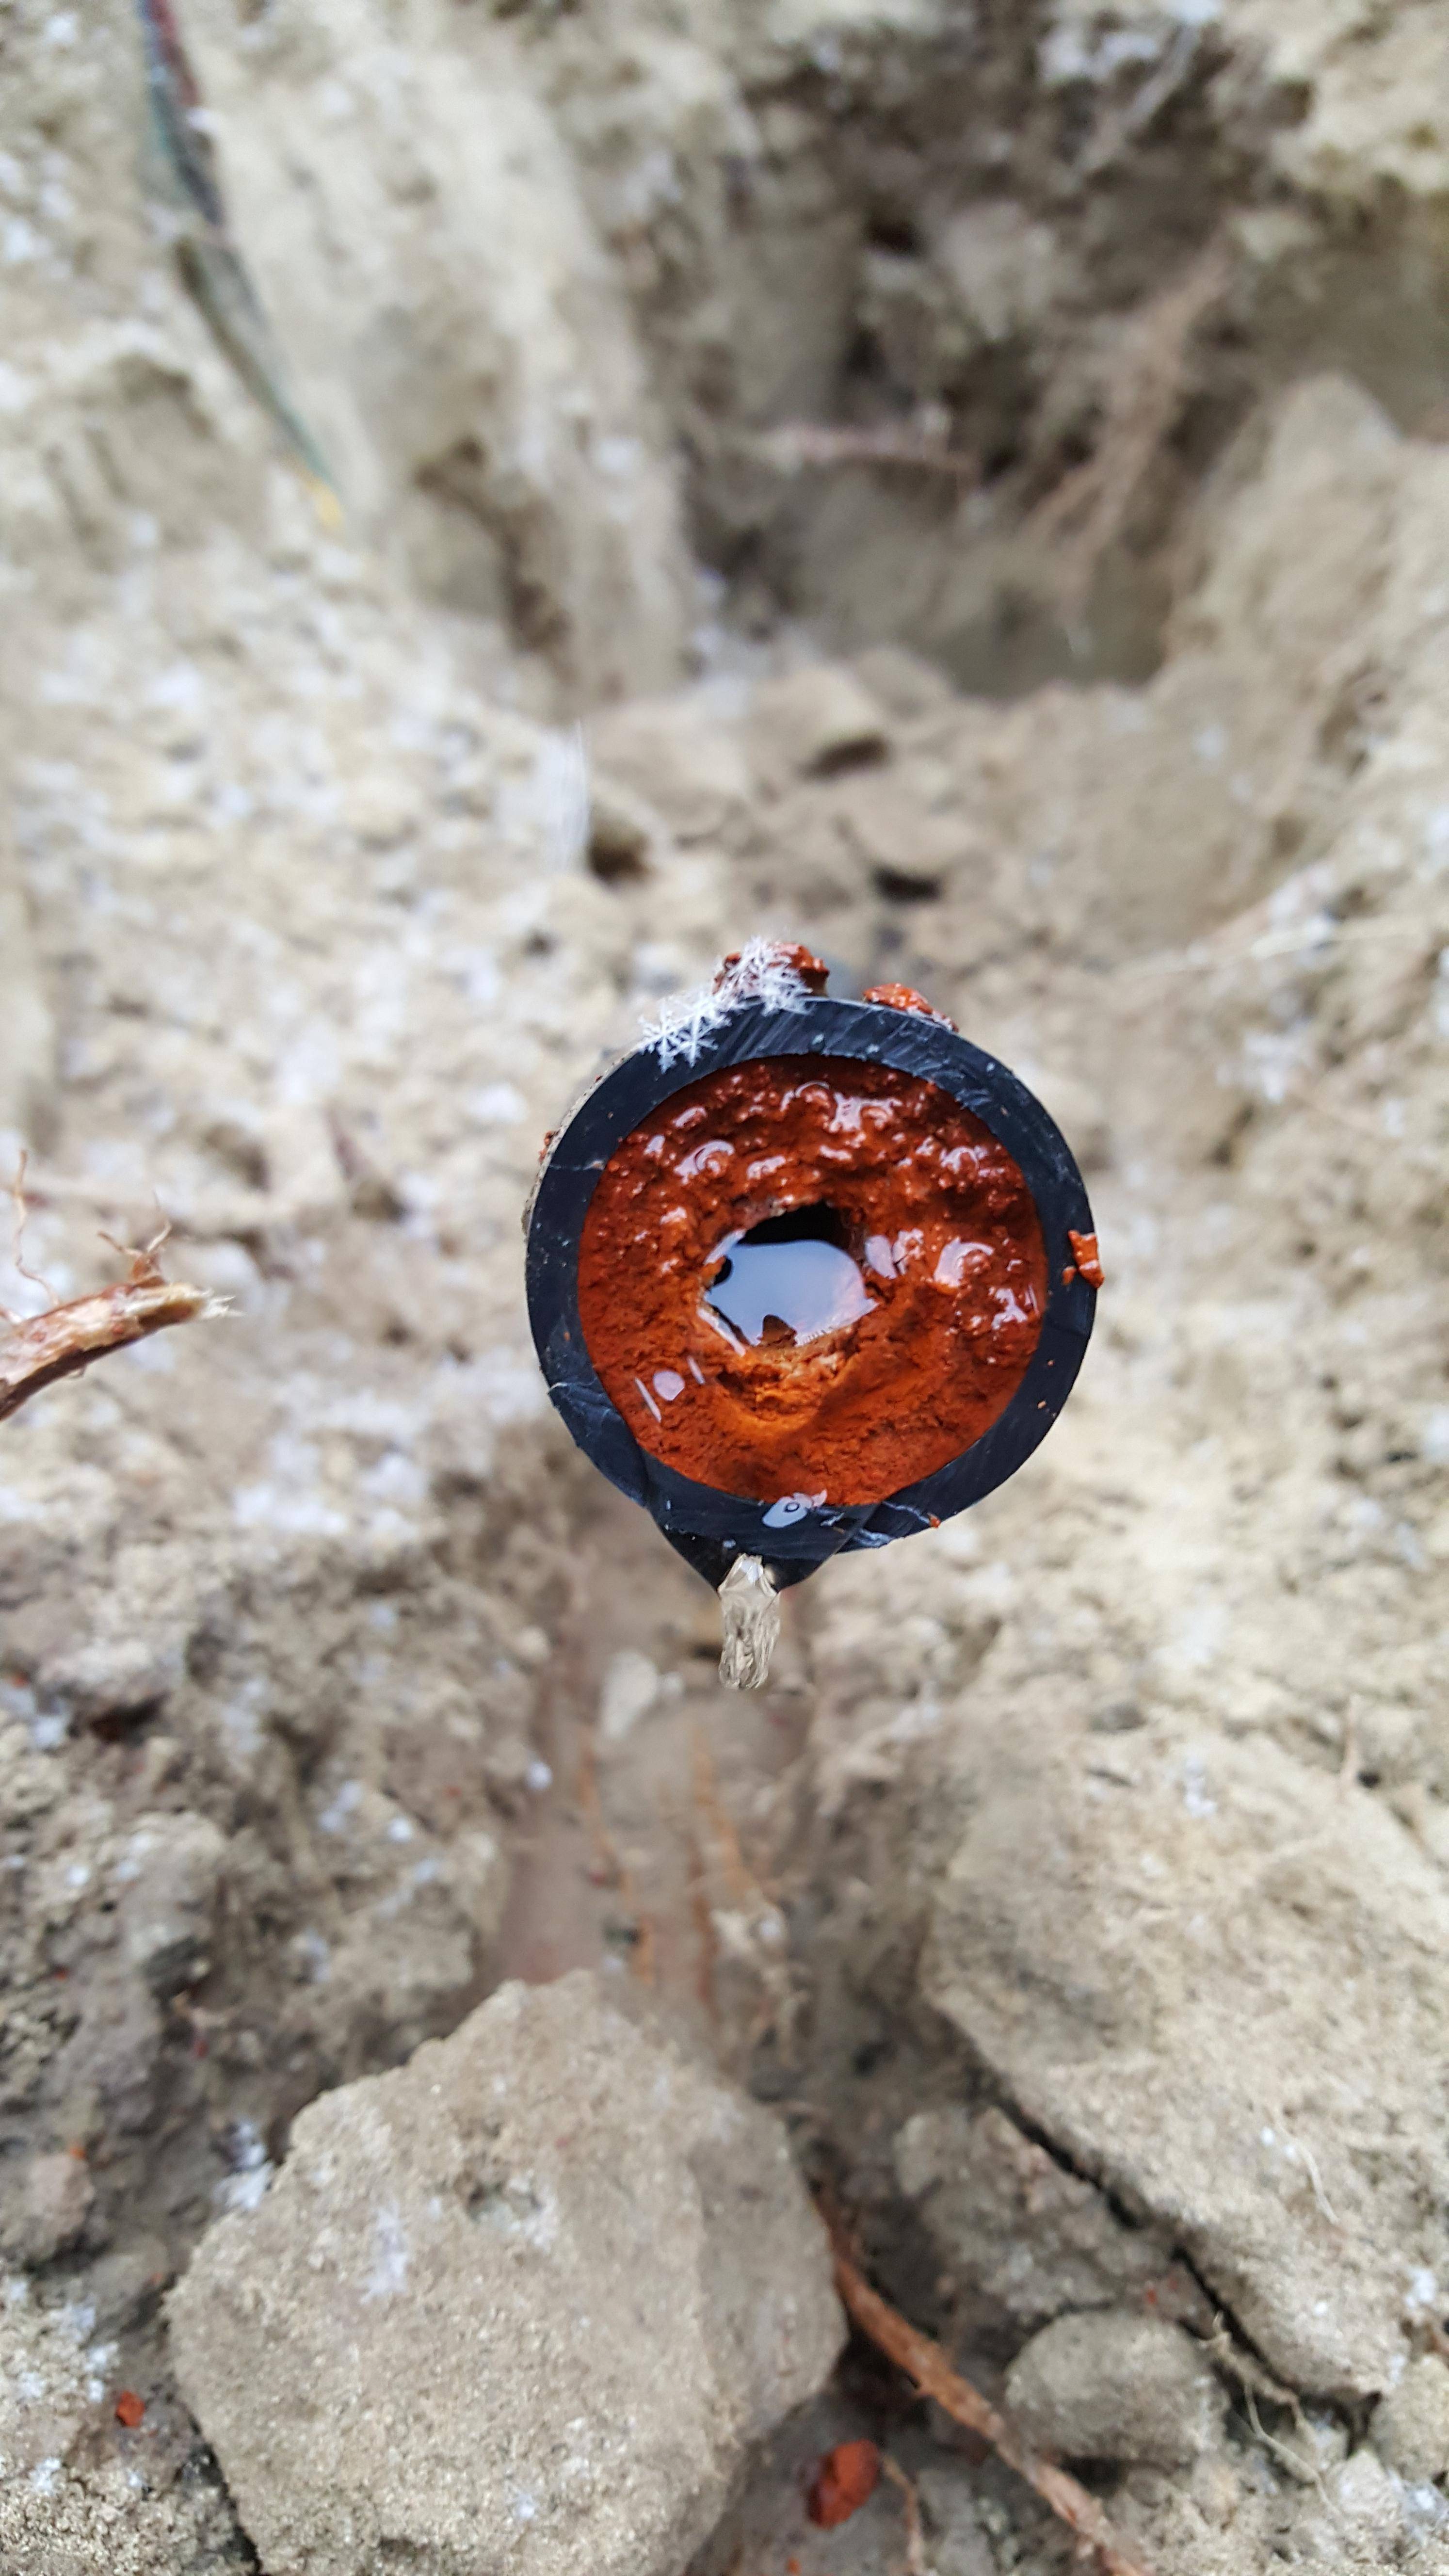 This is what 15 years of rust accumulation looks like in a 1" water pipe.